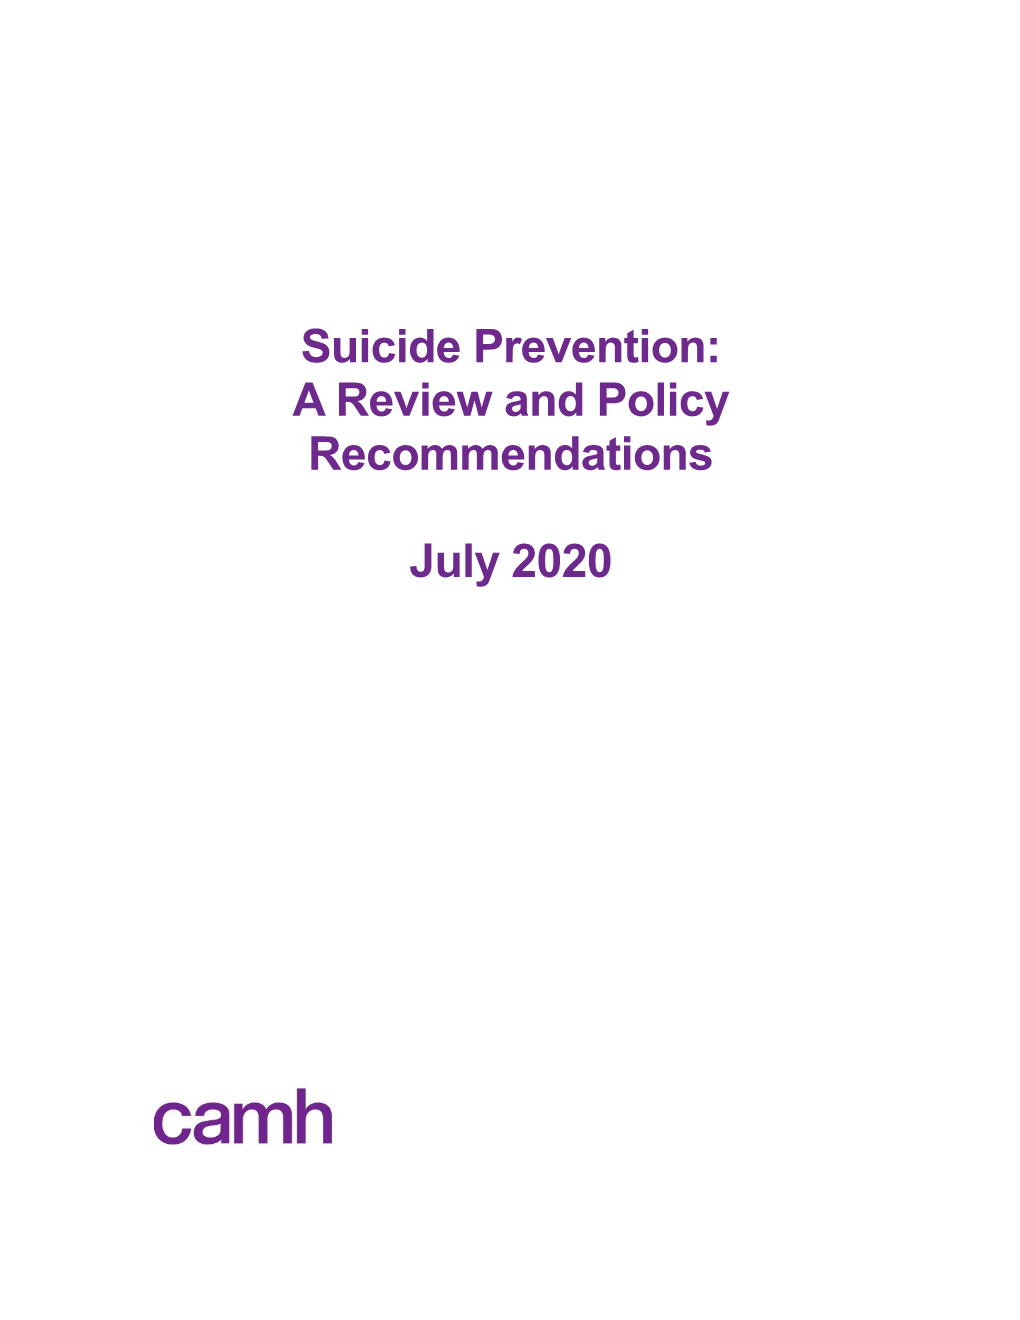 Suicide Prevention: a Review and Policy Recommendations July 2020